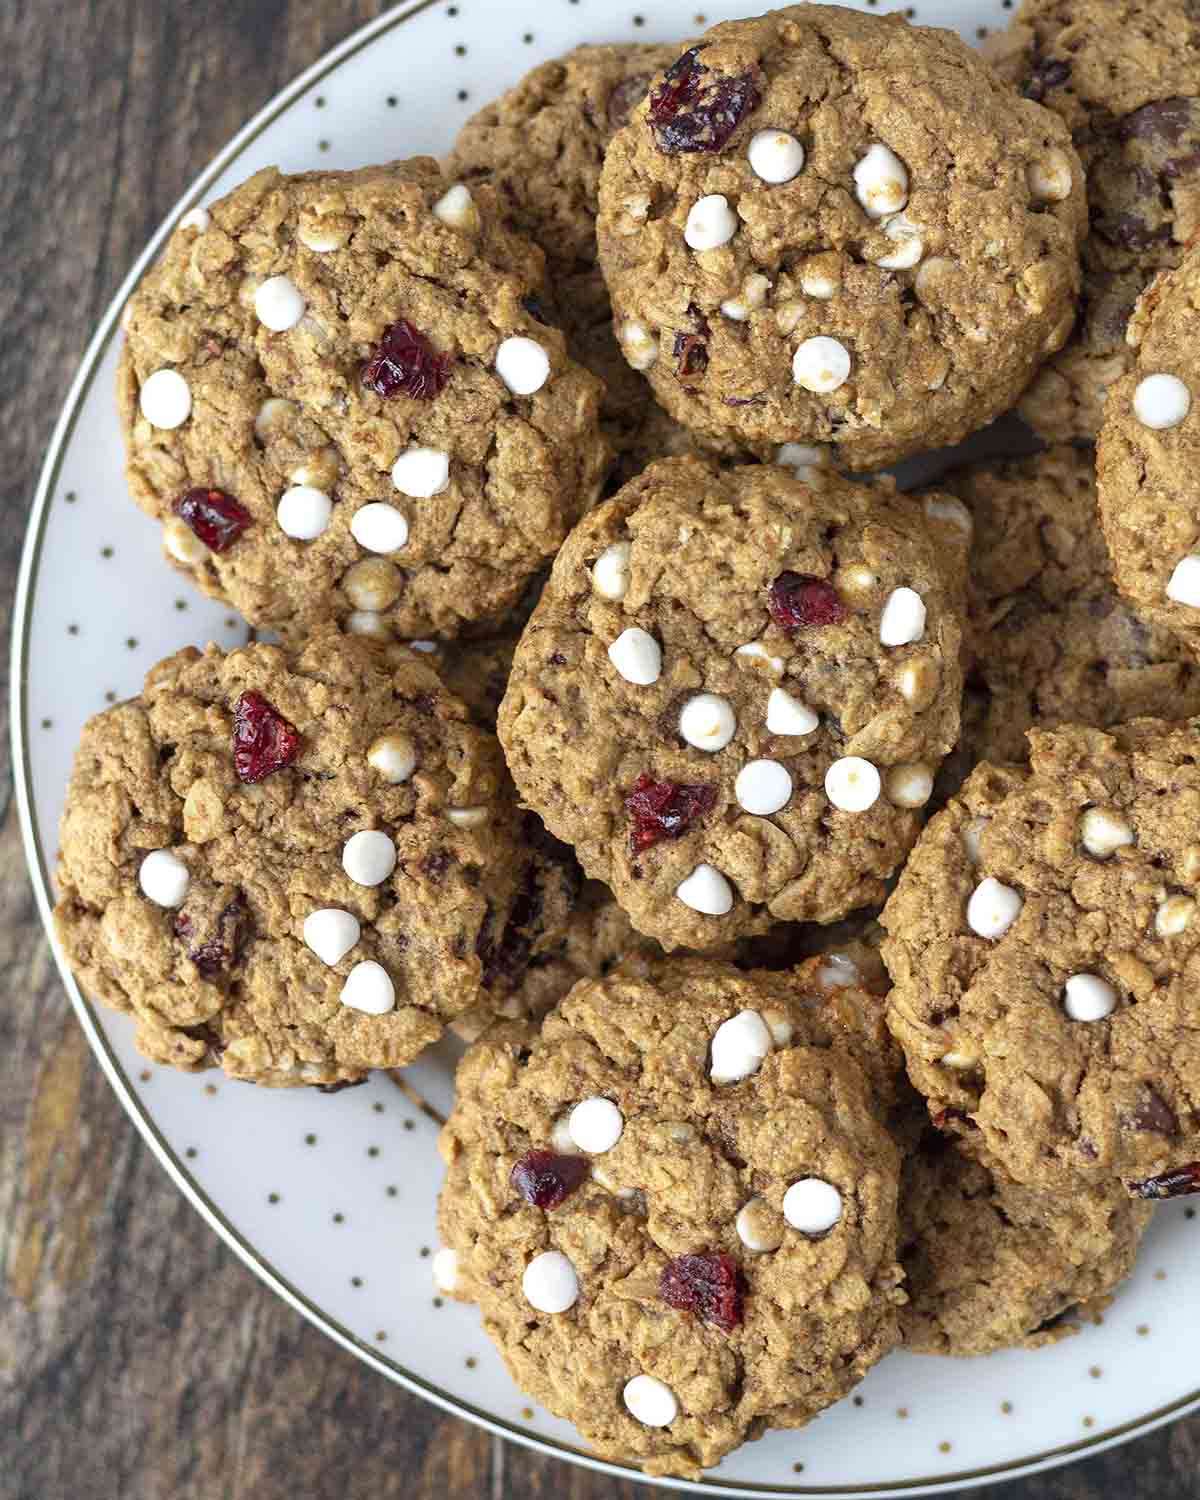 An overhead shot showing a plate of vegan oatmeal cranberry cookies with white chocolate chips.